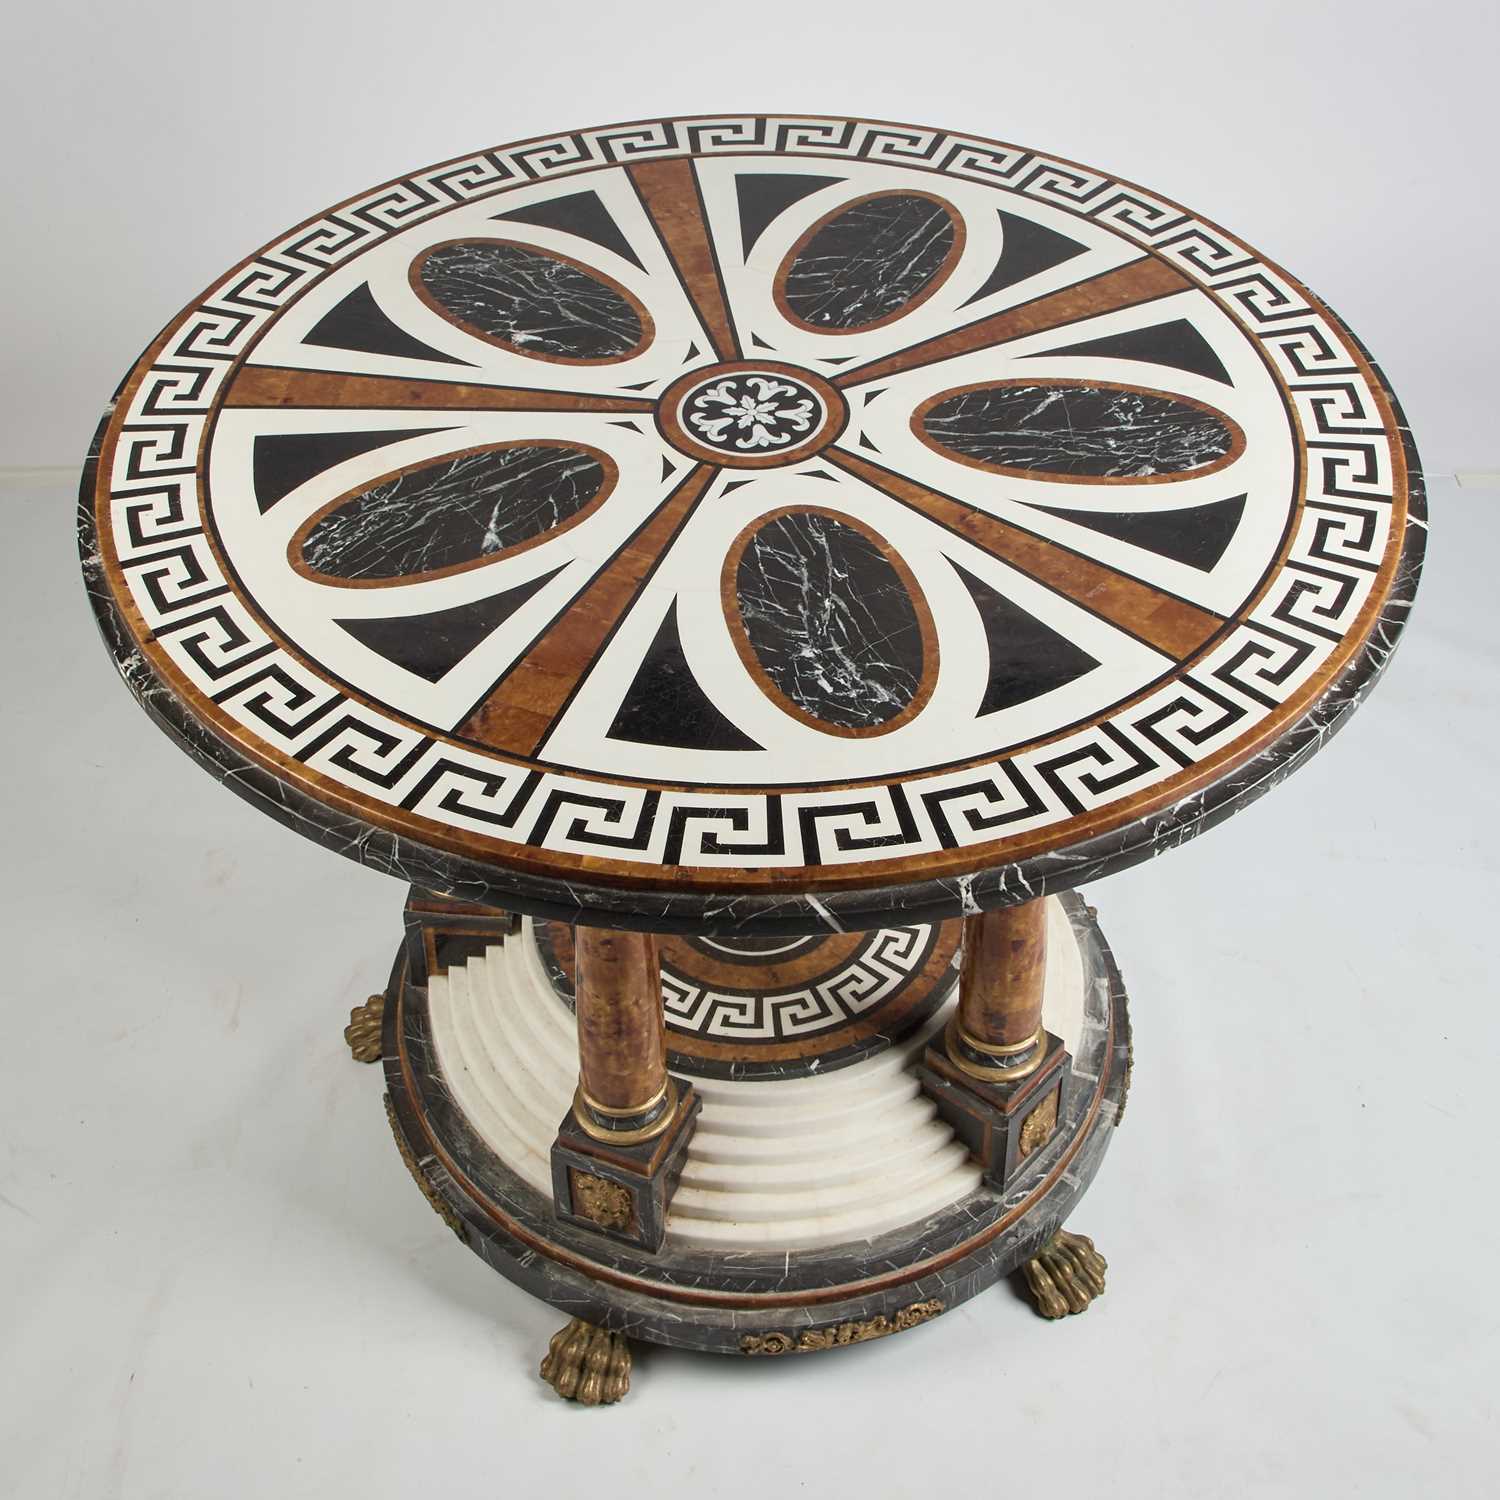 A FRENCH EMPIRE STYLE MARBLE SPECIMEN TABLE - Image 3 of 3